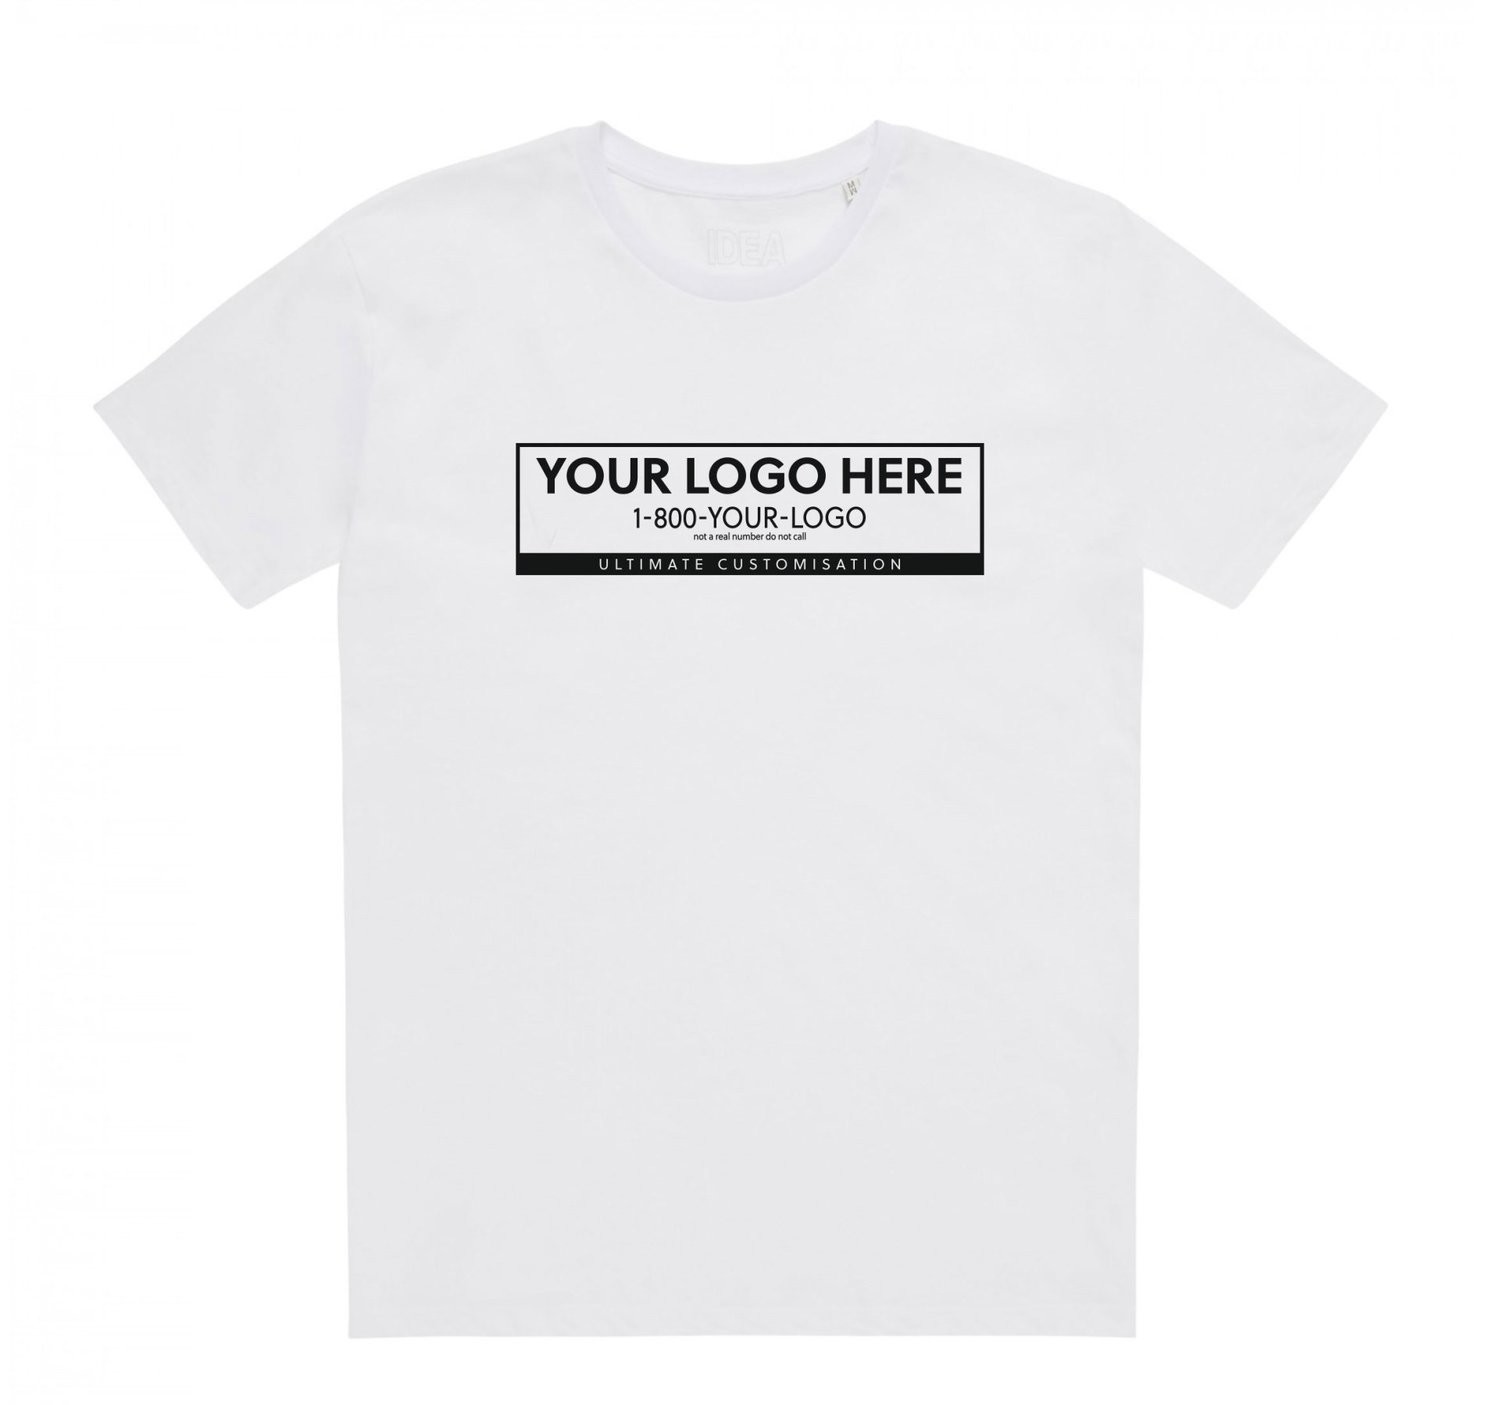 YOUR LOGO HERE T-Shirt